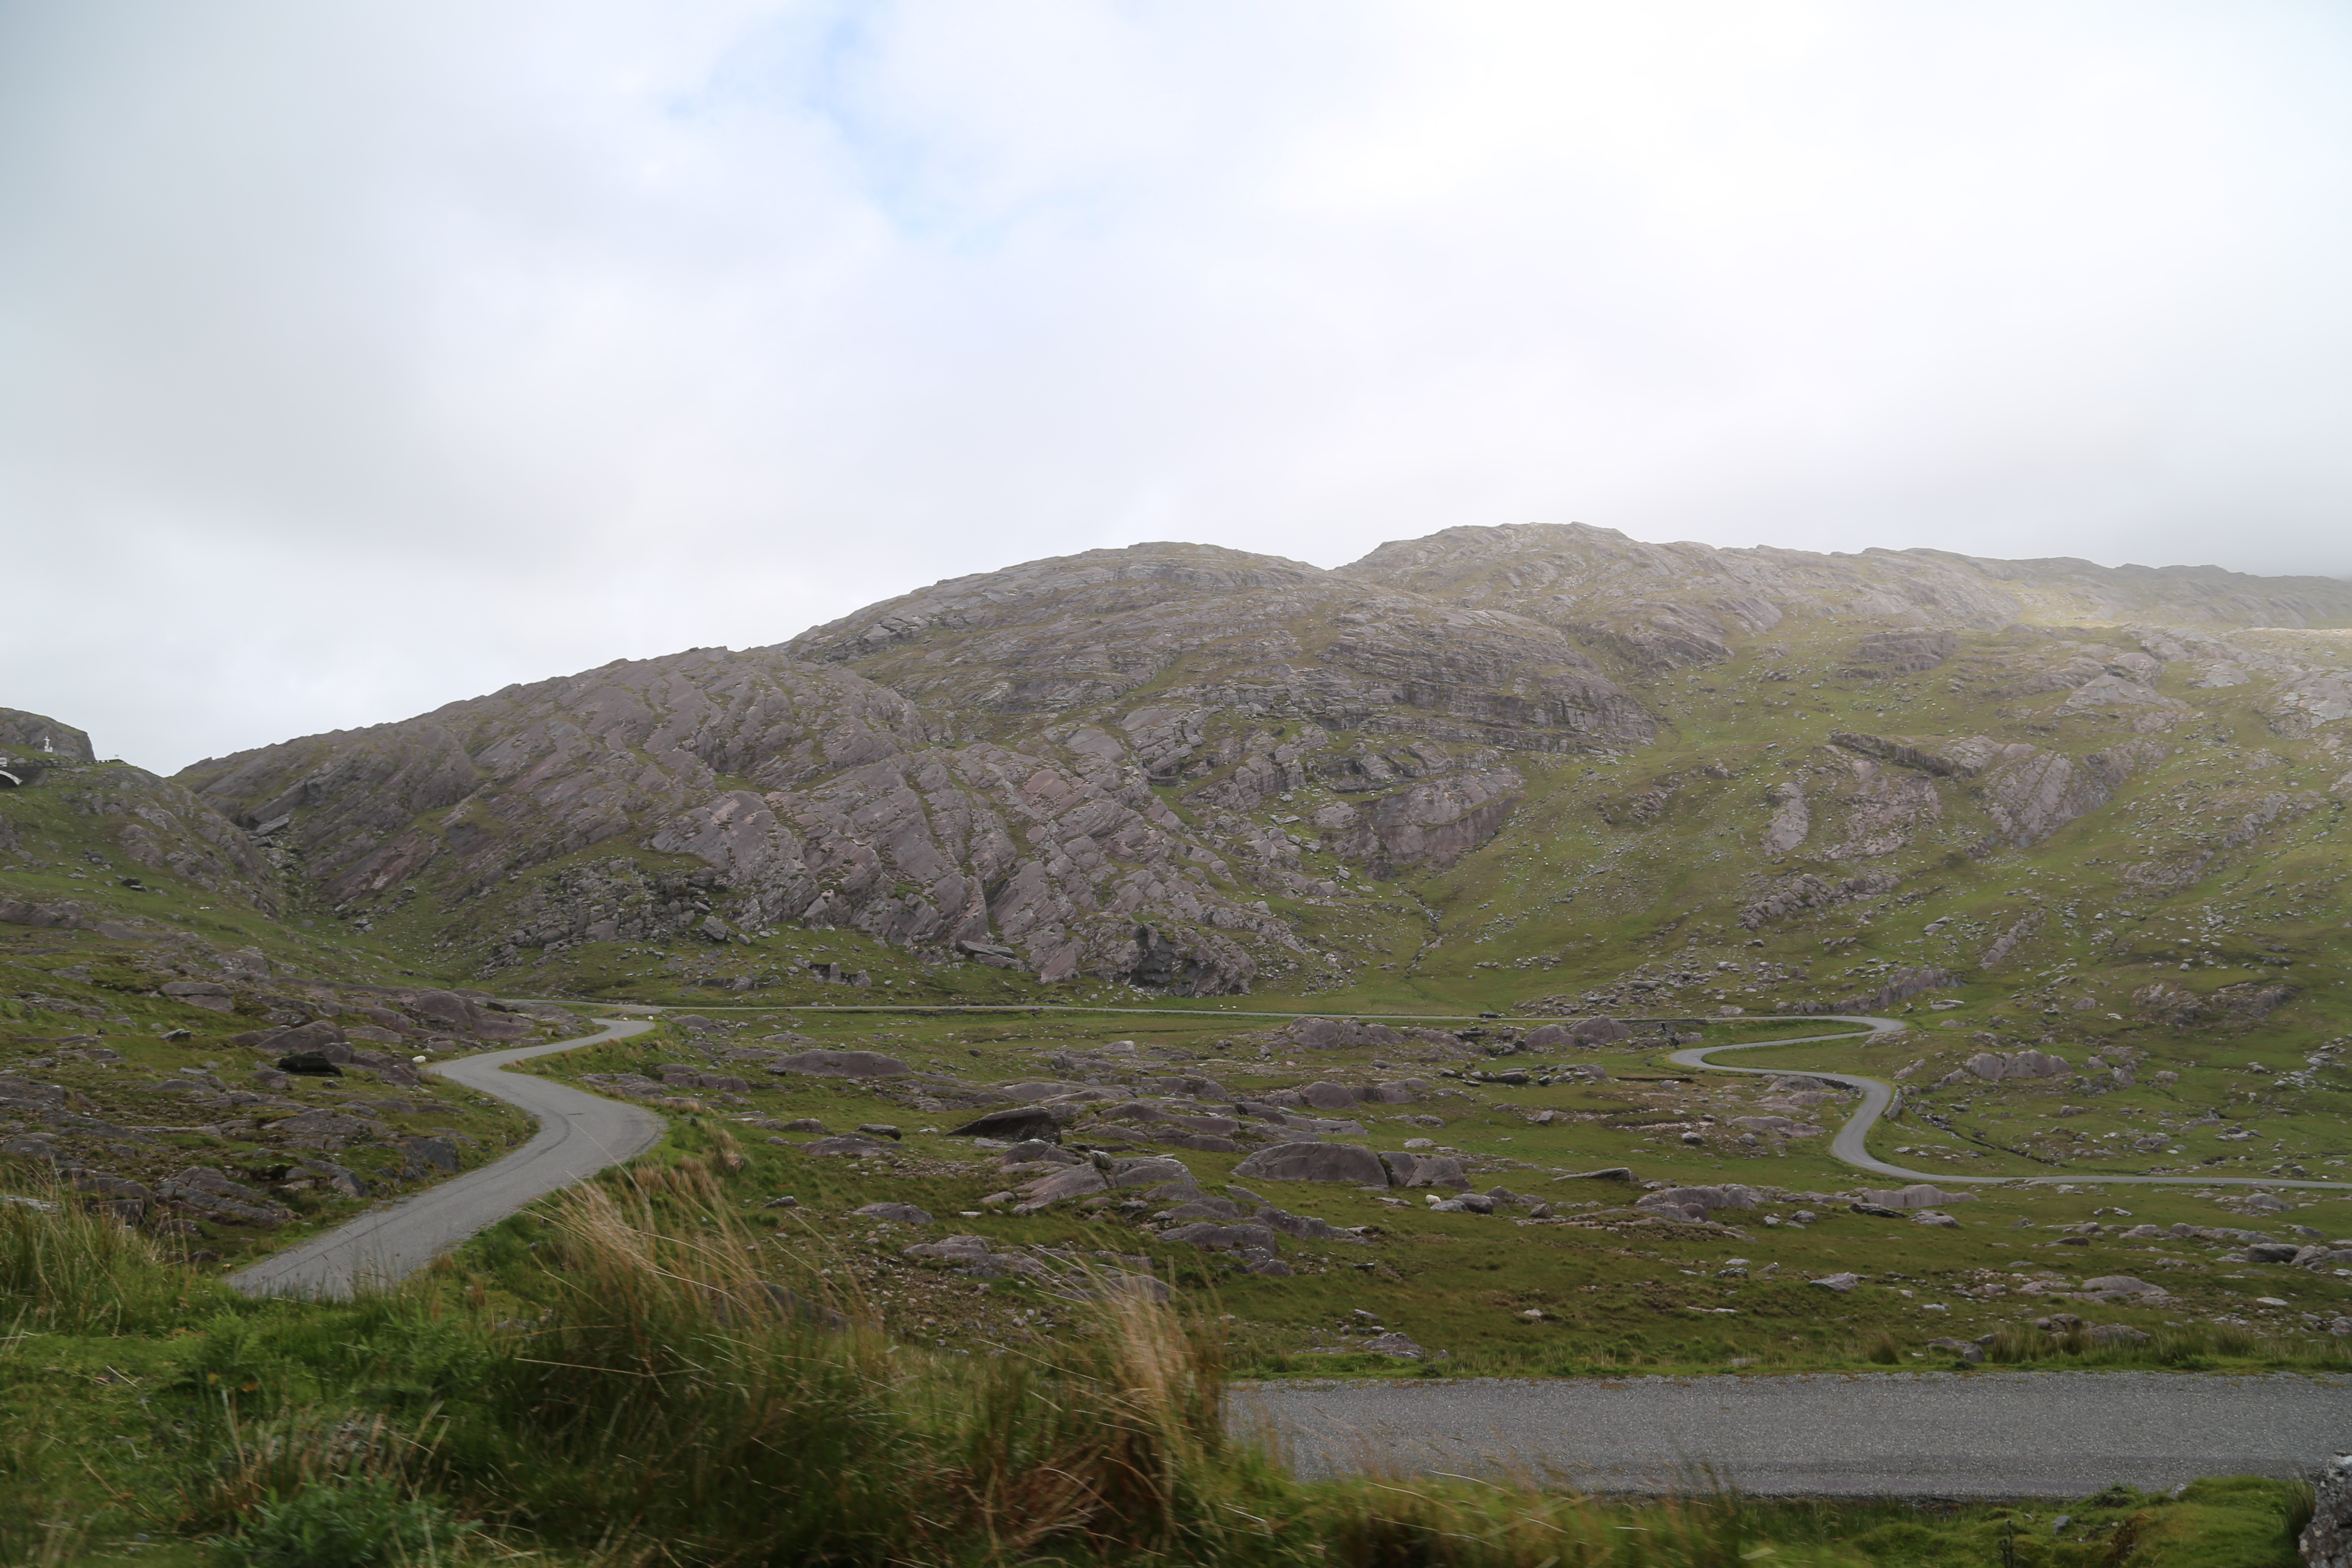 2014 Europe Trip Day 4 - Ireland (Beara Peninsula, Healy Pass, Castletown-Bearhaven, Dursey Island Cable Car, Allihies, Eyeries, Chips and Curry)